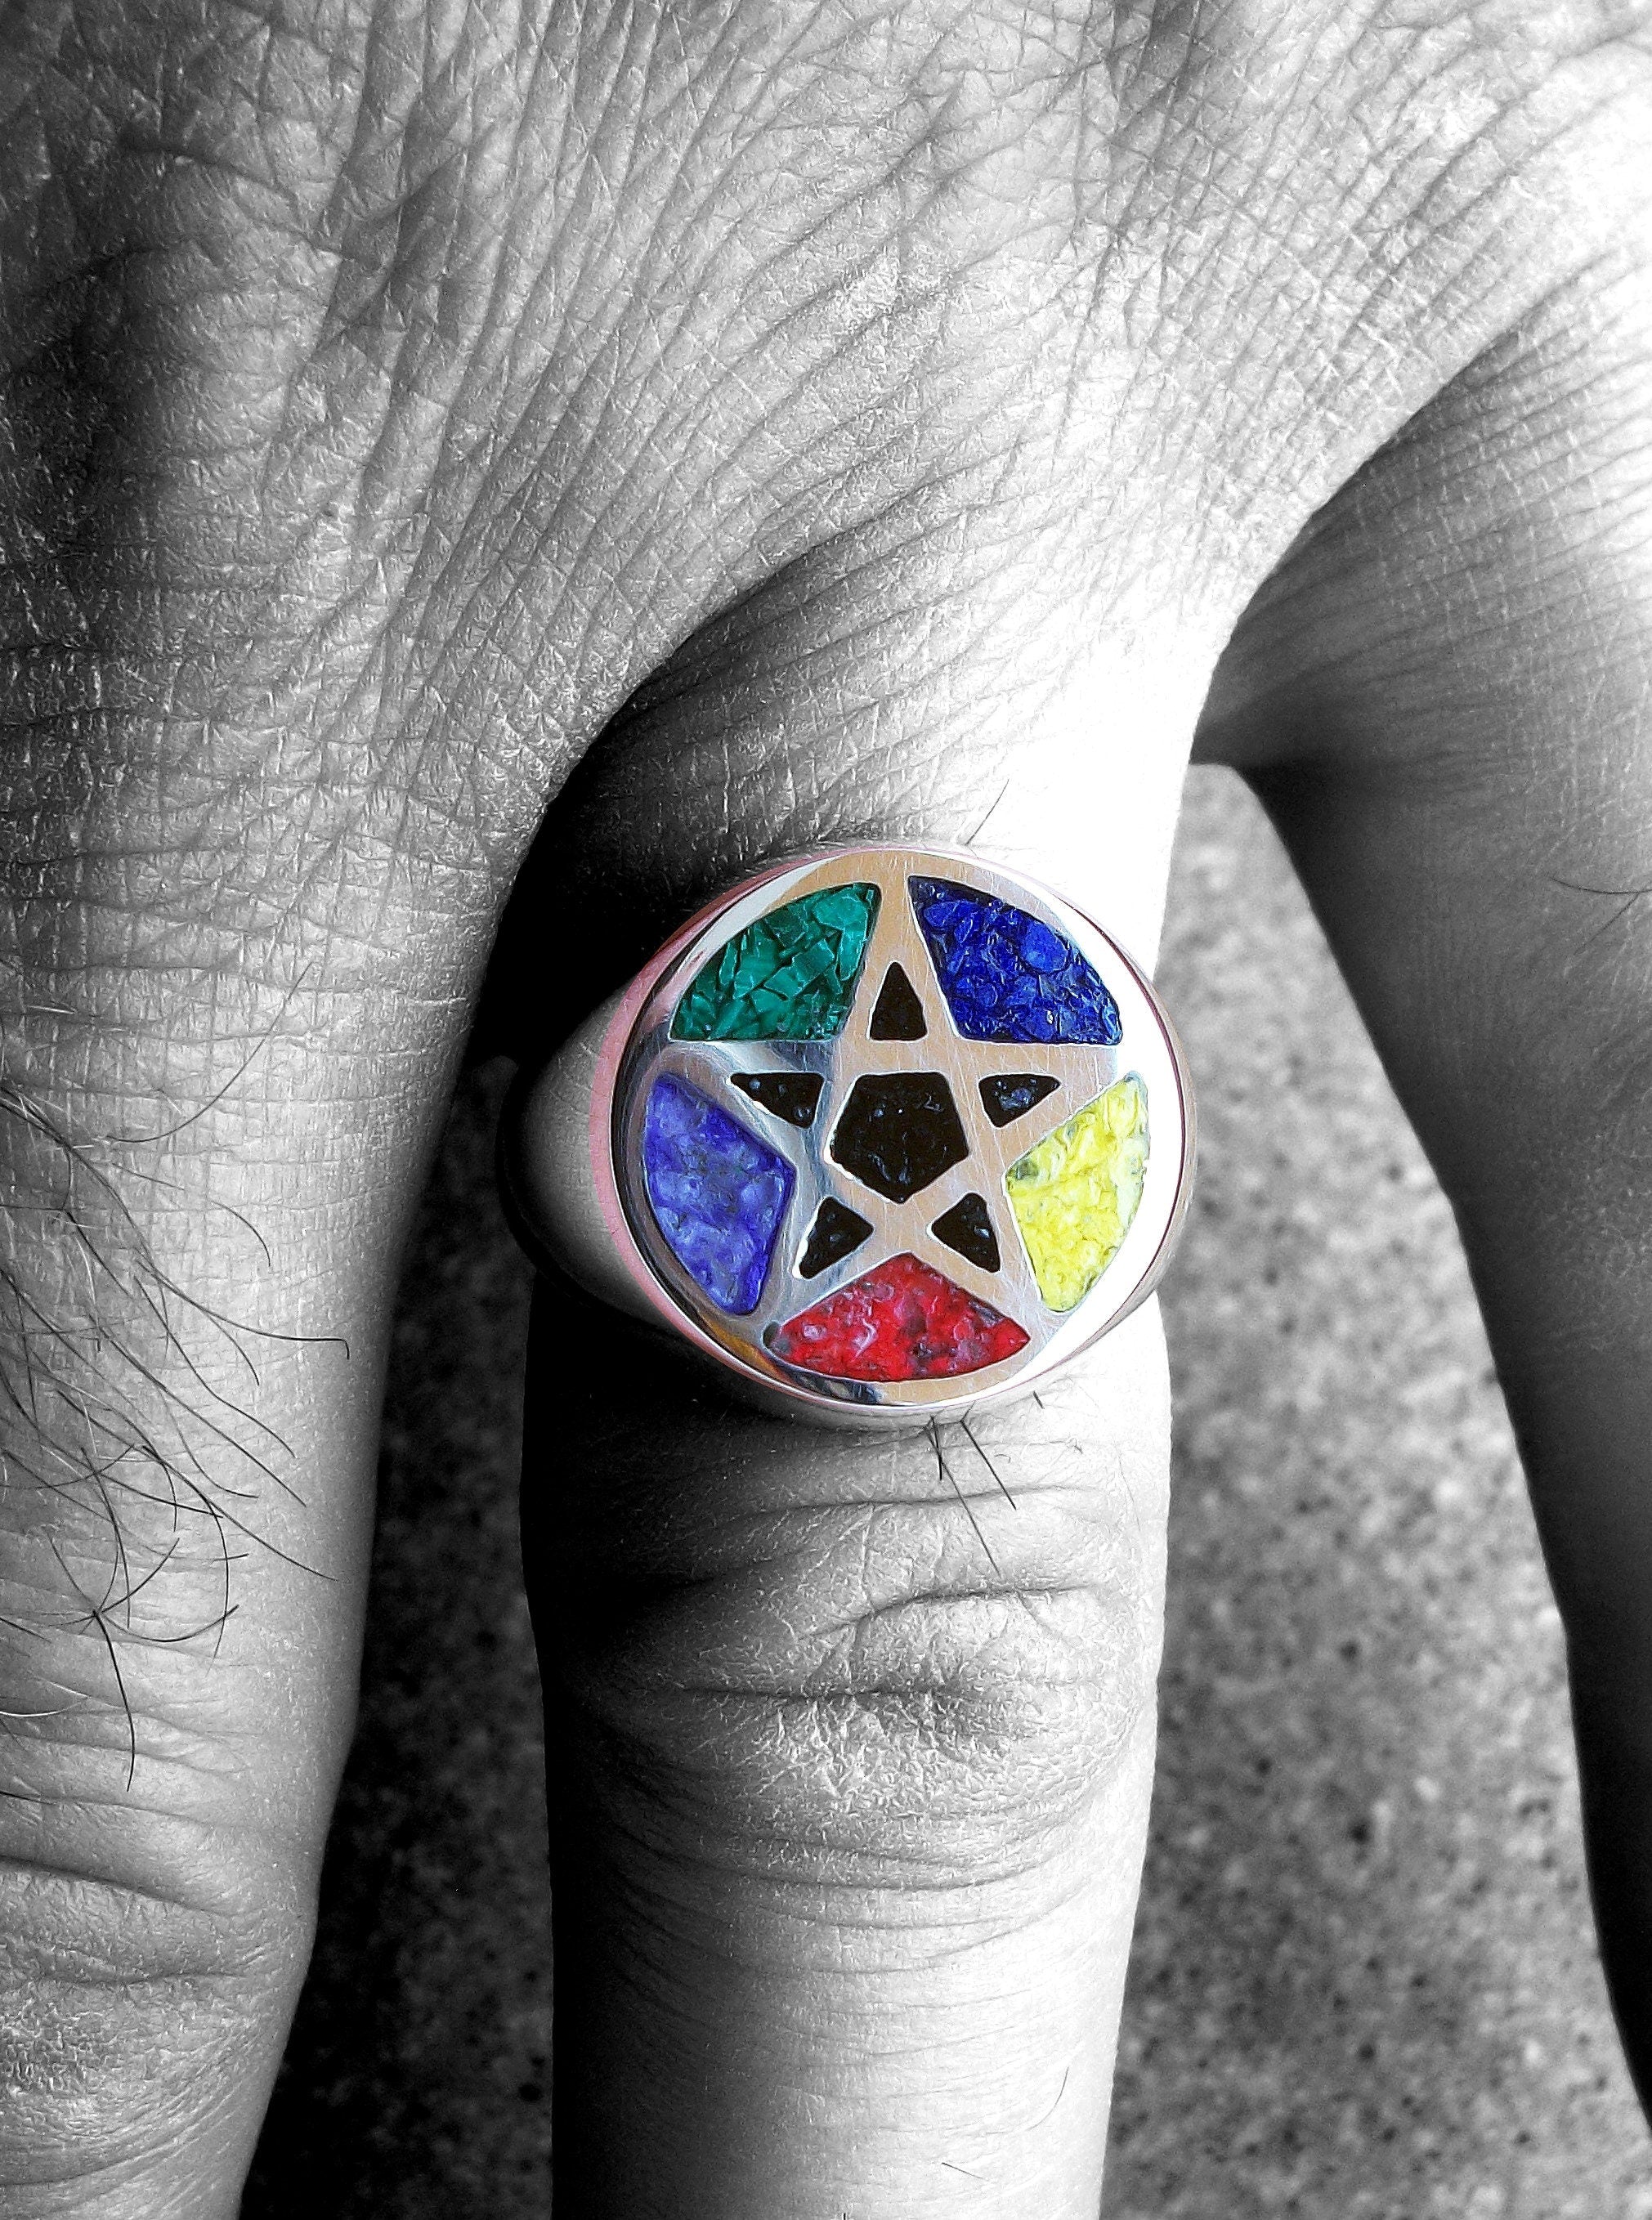 Pentacle ring - Sterling Silver Pentacle Ring - 5 Elements  ALL SIZES